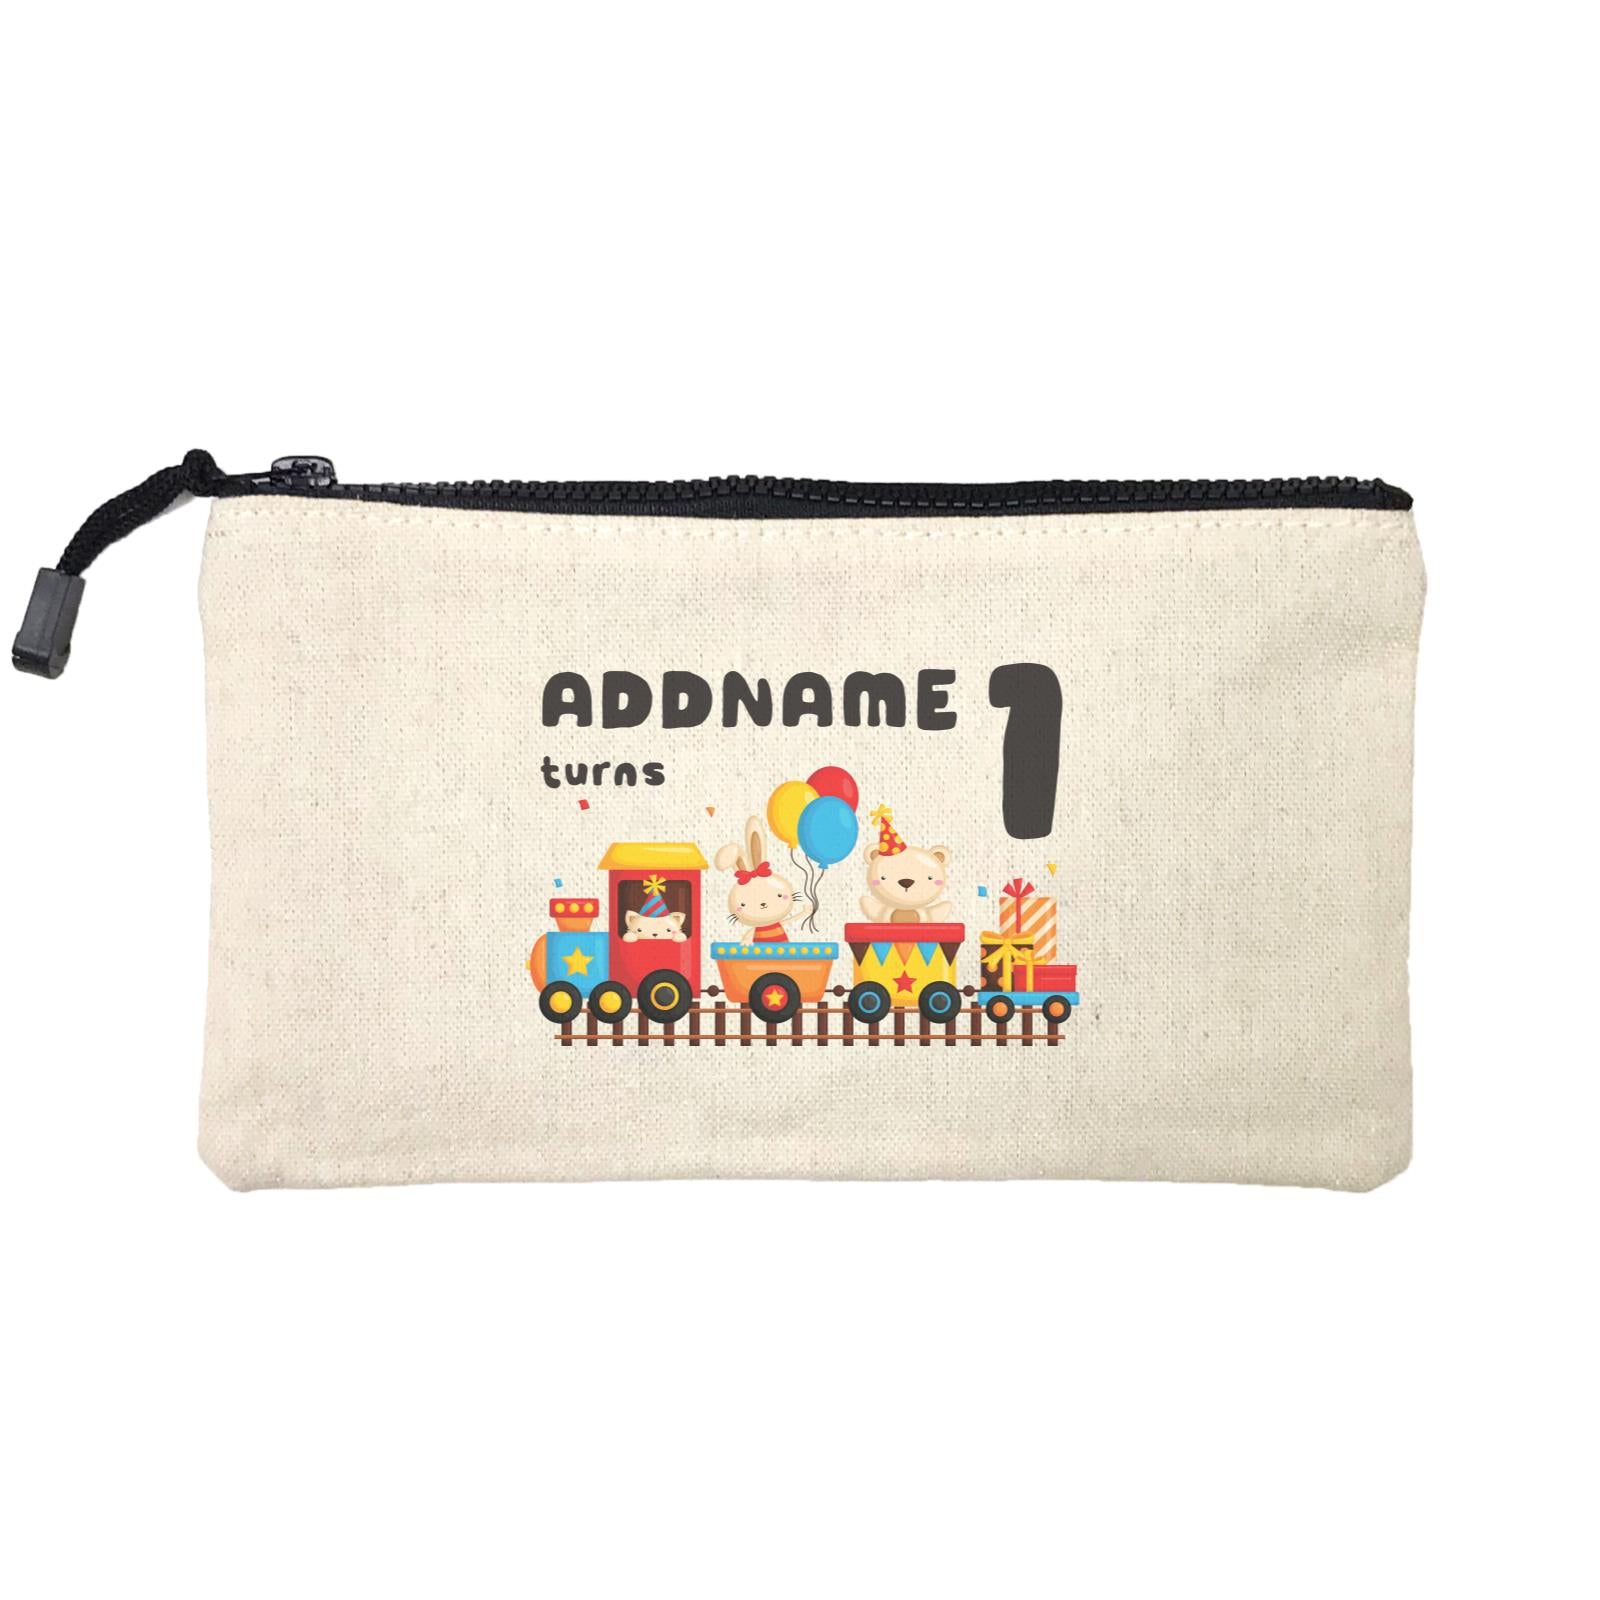 Birthday Fun Train And Animals Group Addname Turns 1 Mini Accessories Stationery Pouch